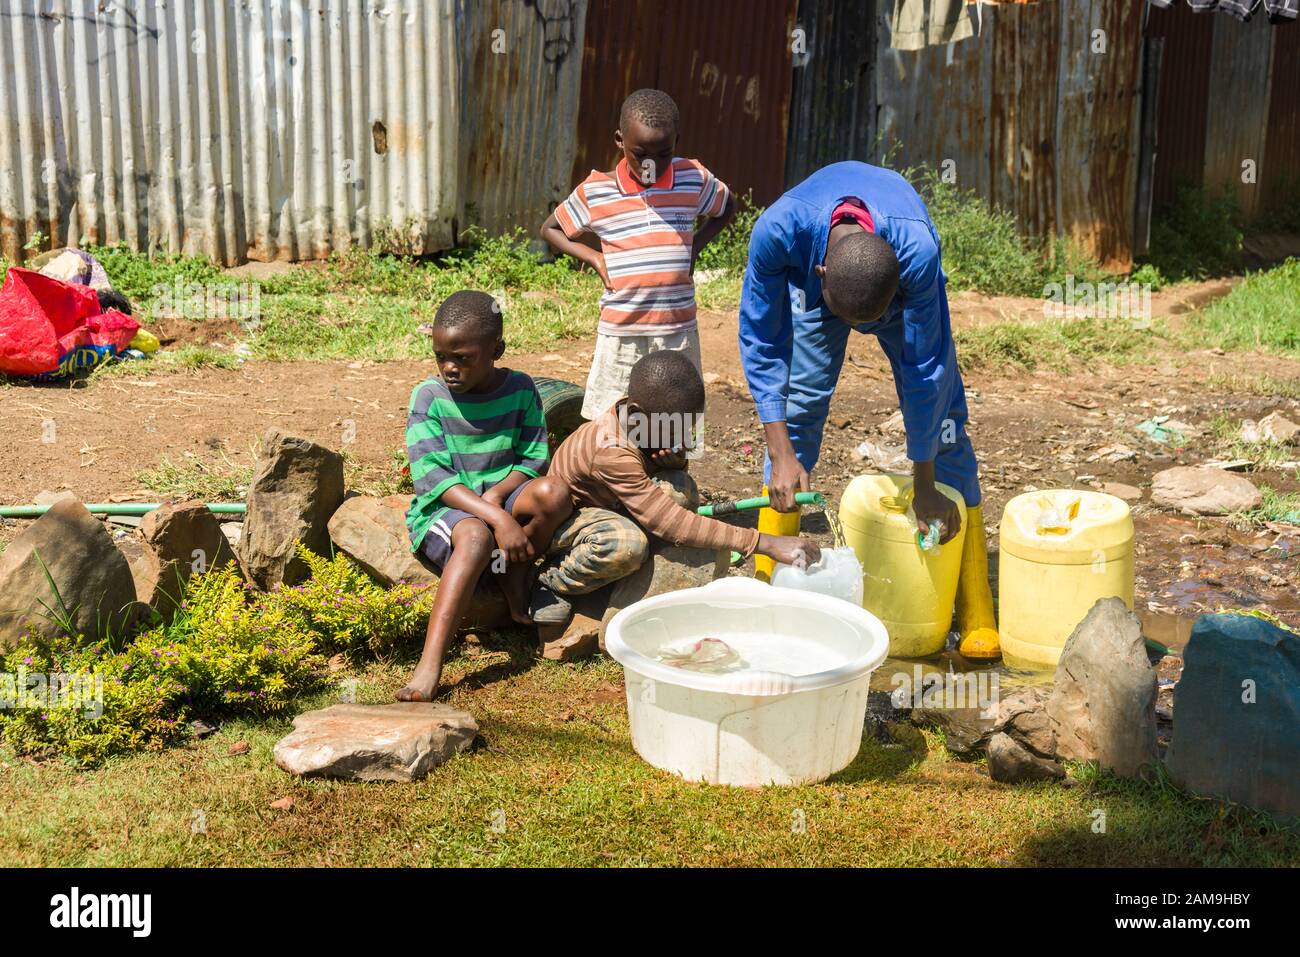 A young man and some local boys fill water containers from a fresh water pipe, Korogocho slum, Nairobi, Kenya Stock Photo